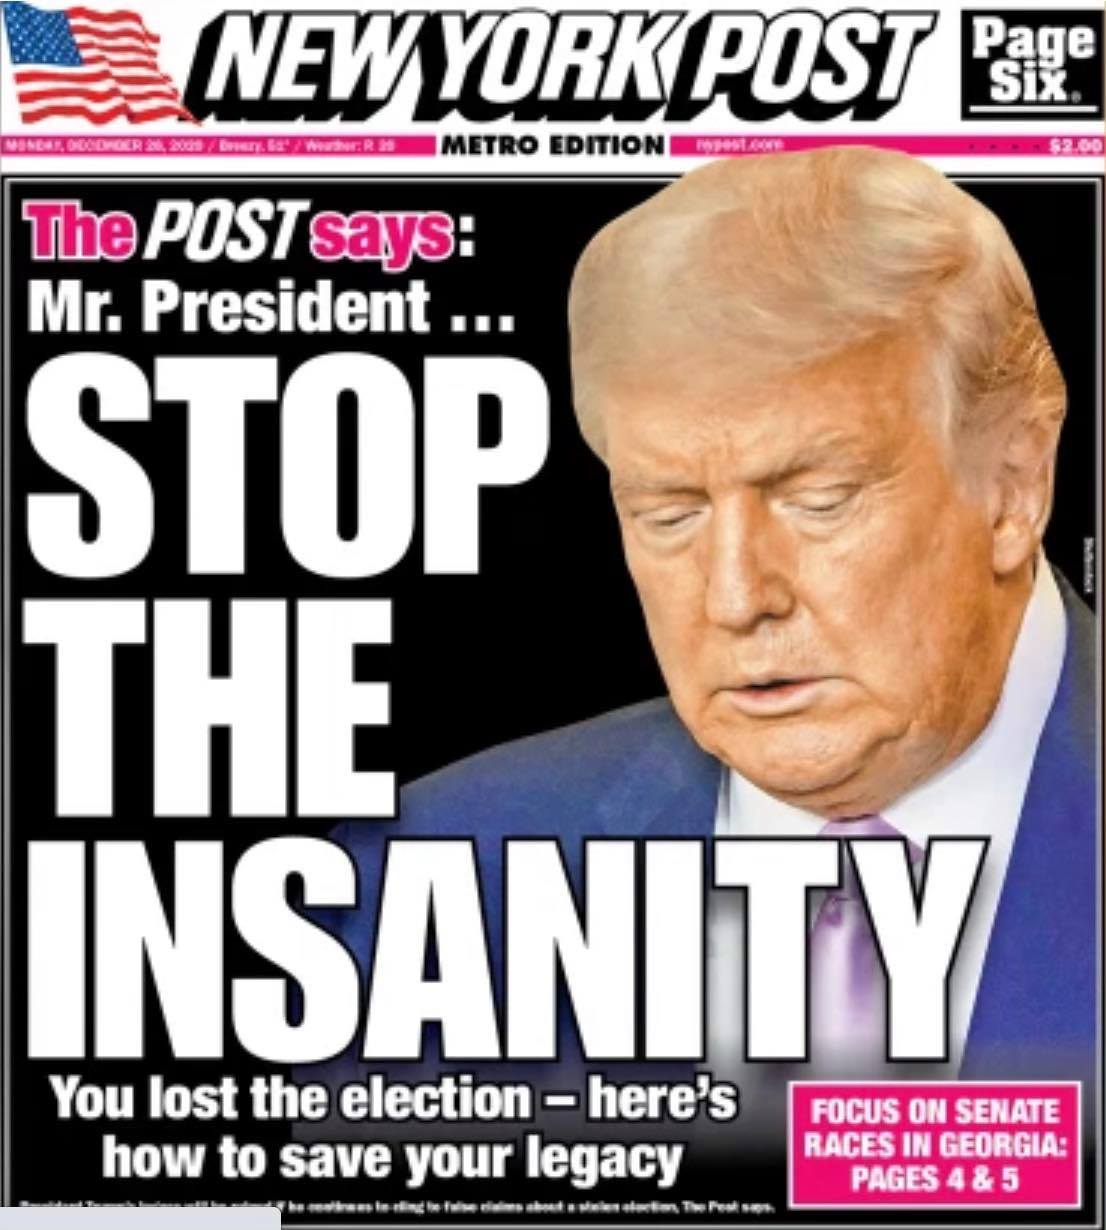 133939540_410538680065640_6171478232749011609_n NY Post Hits Trump With Embarrassing New Cover Image Conspiracy Theory Donald Trump Election 2020 Featured Politics Top Stories Twitter 